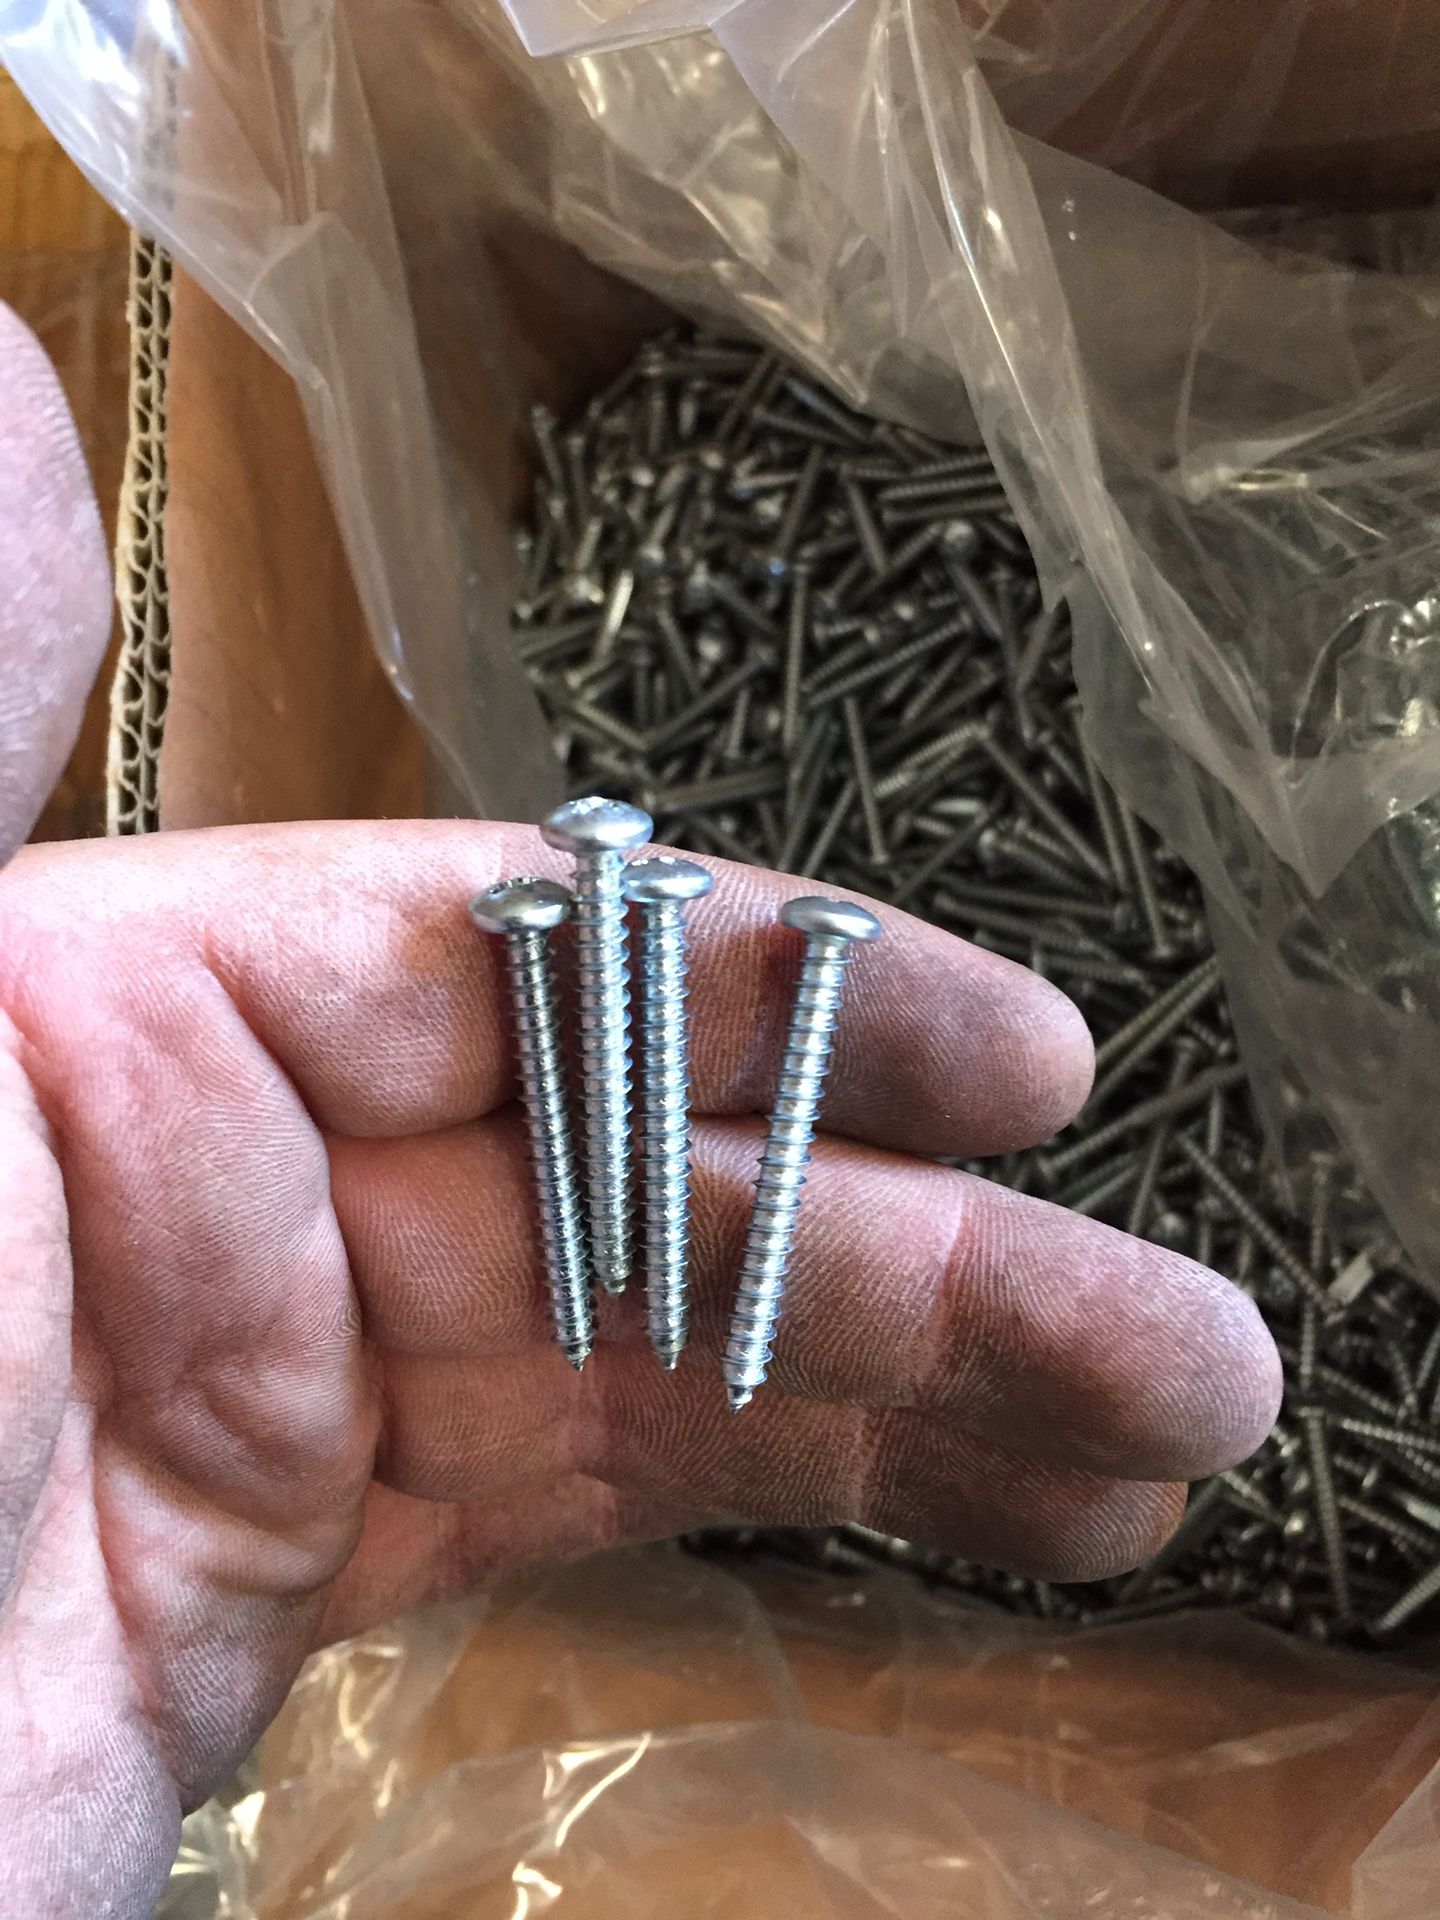 Sheet metal screws aka Tapping screws. About 14 boxes available of 6,000 pieces each. $30